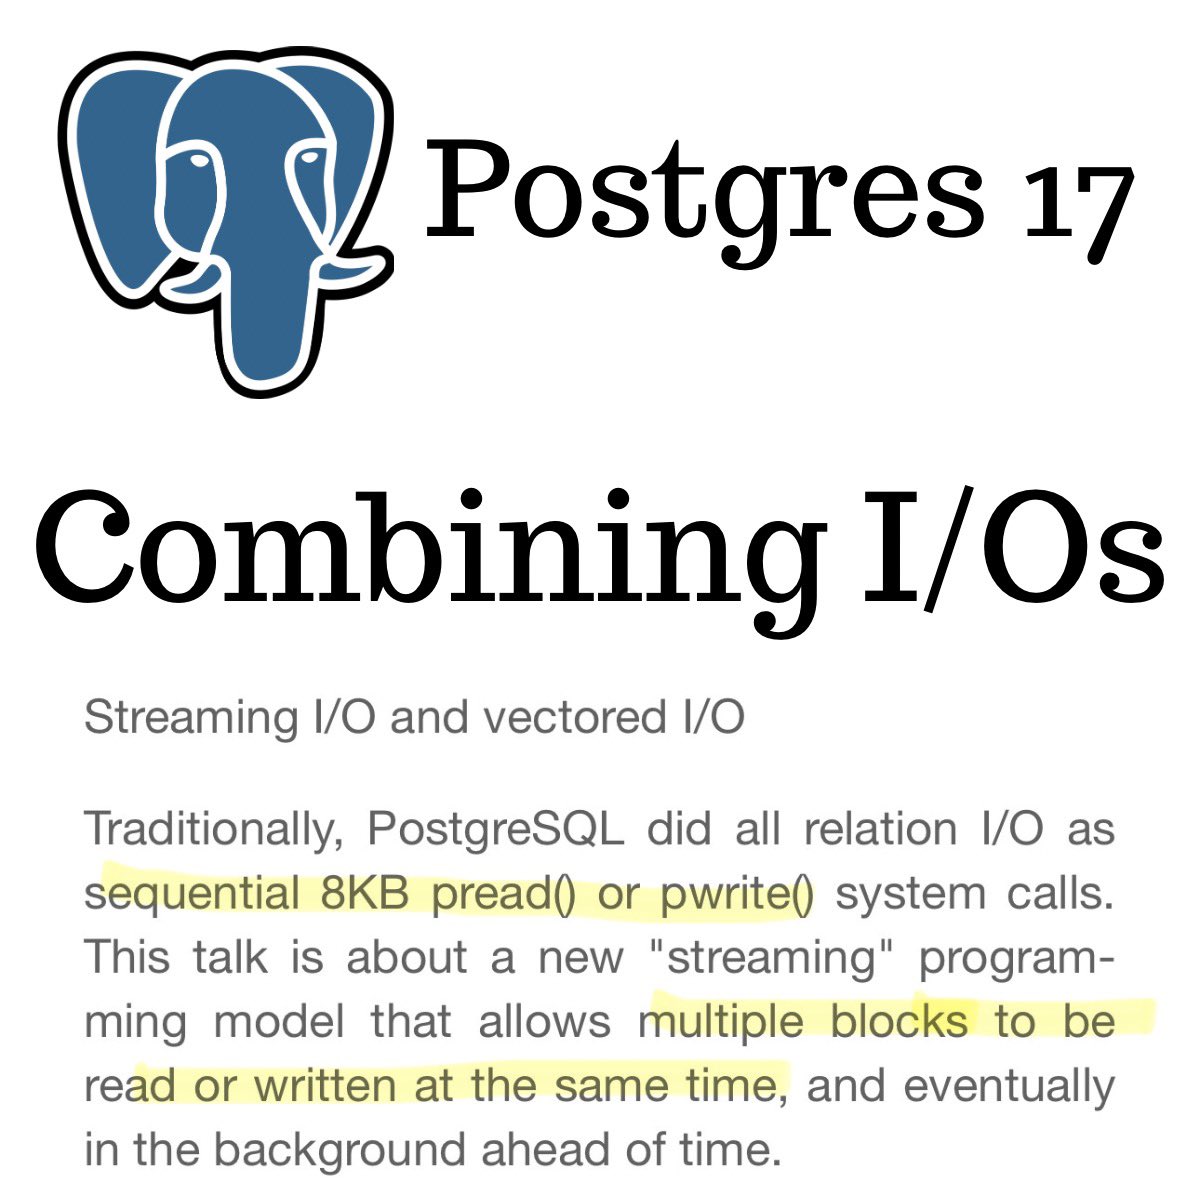 This Postgres 17 feature is amazing

You see, postgres like most databases work with fixed size pages. Pretty much everything is in this format, indexes, table data, etc. Those pages are 8K in size, each page will have the rows, or index tuples and a fixed header. The pages are